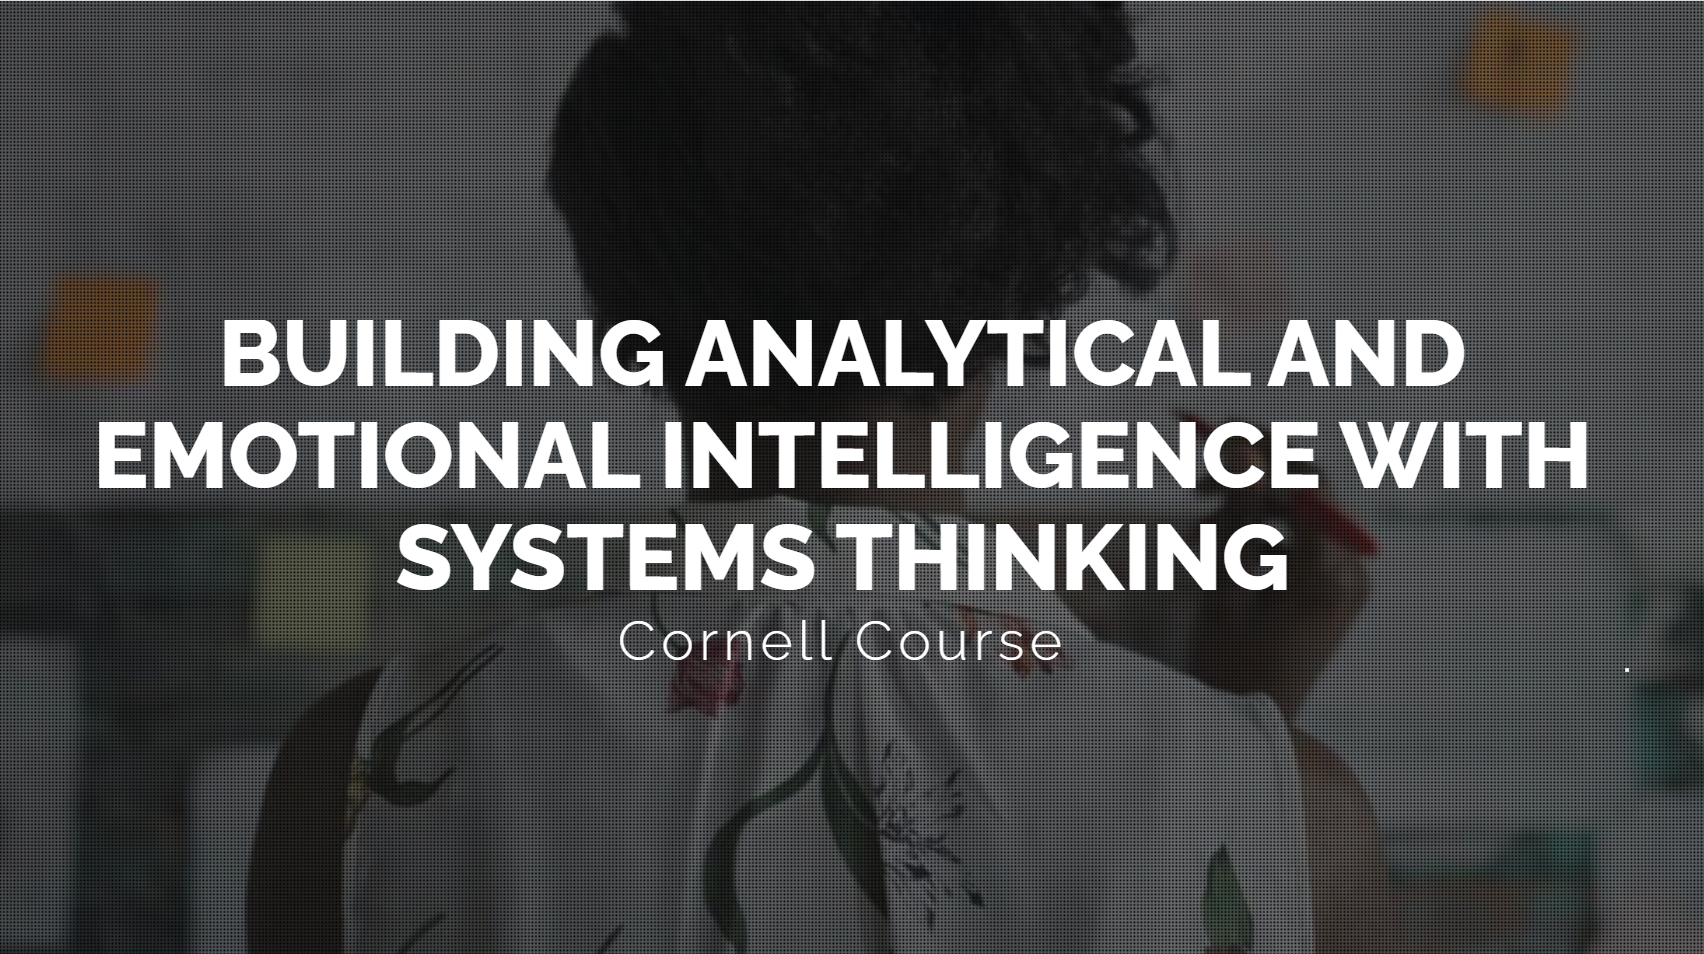 Building Analytical and Emotional Intelligence with Systems Thinking